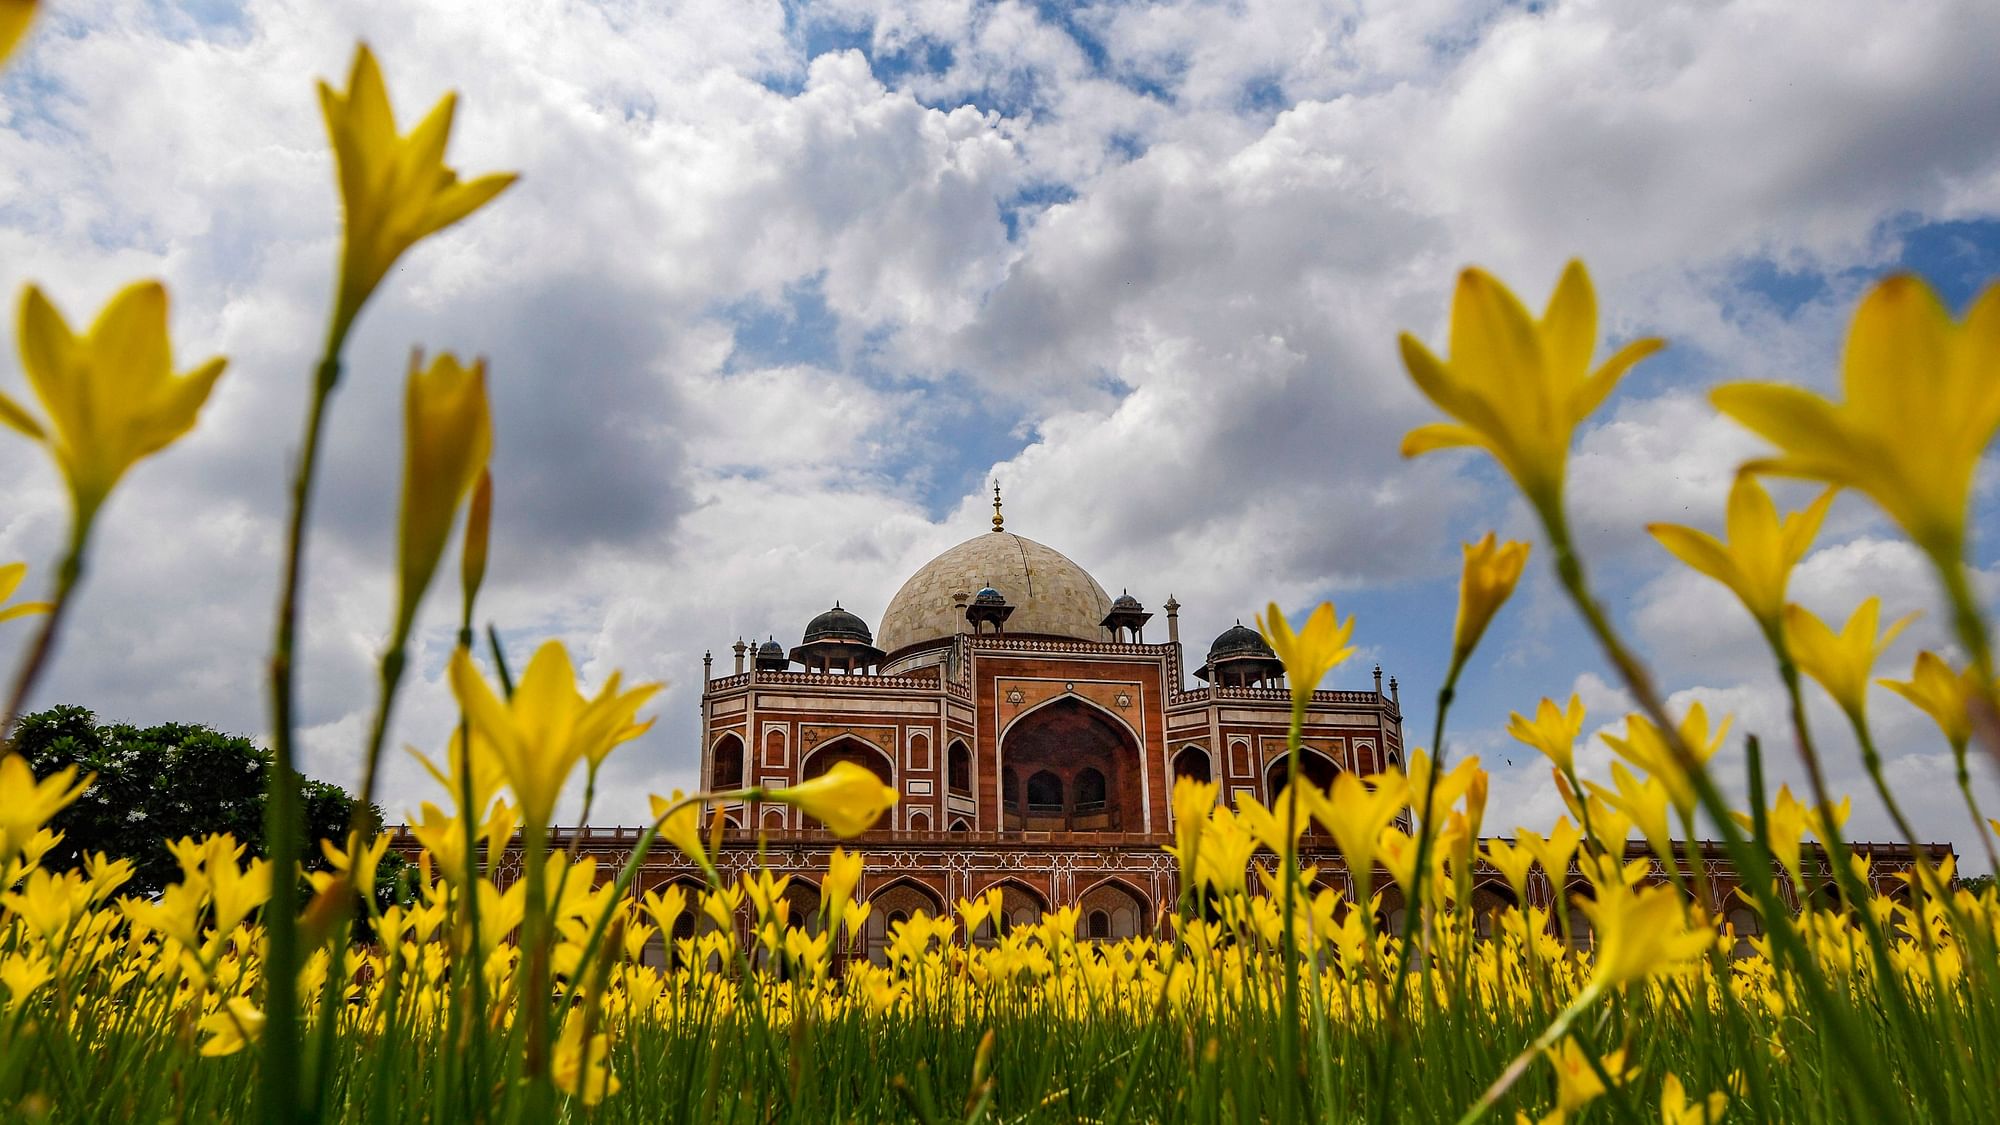 Rain Lily flowers in bloom at the Humayun Tomb during monsoon season in New Delhi.  